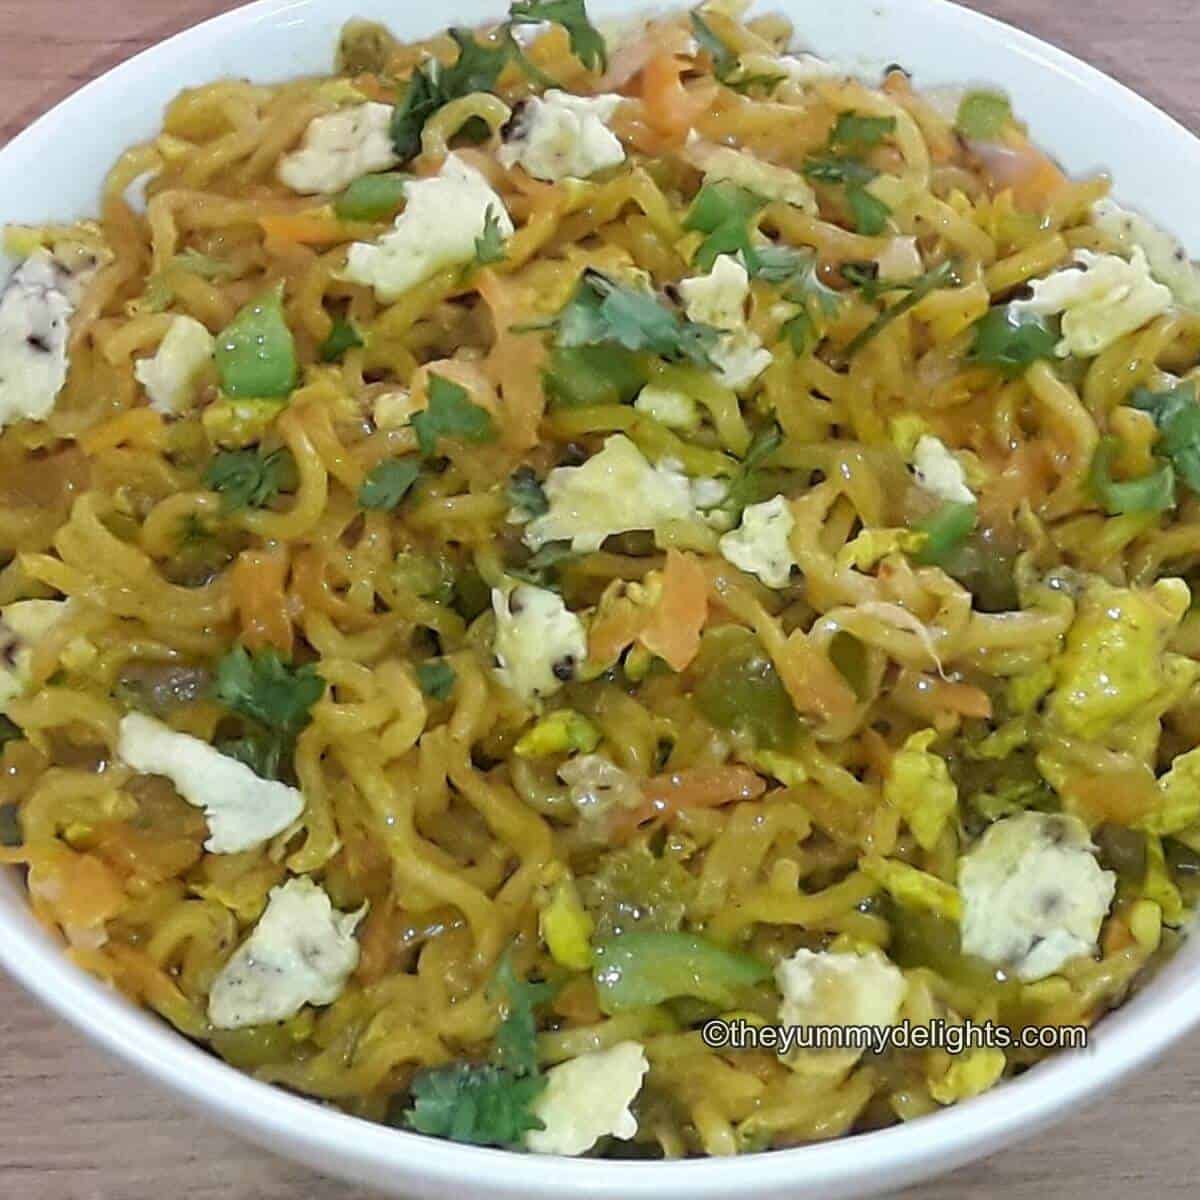 close up of egg maggi served in a whie bowl.